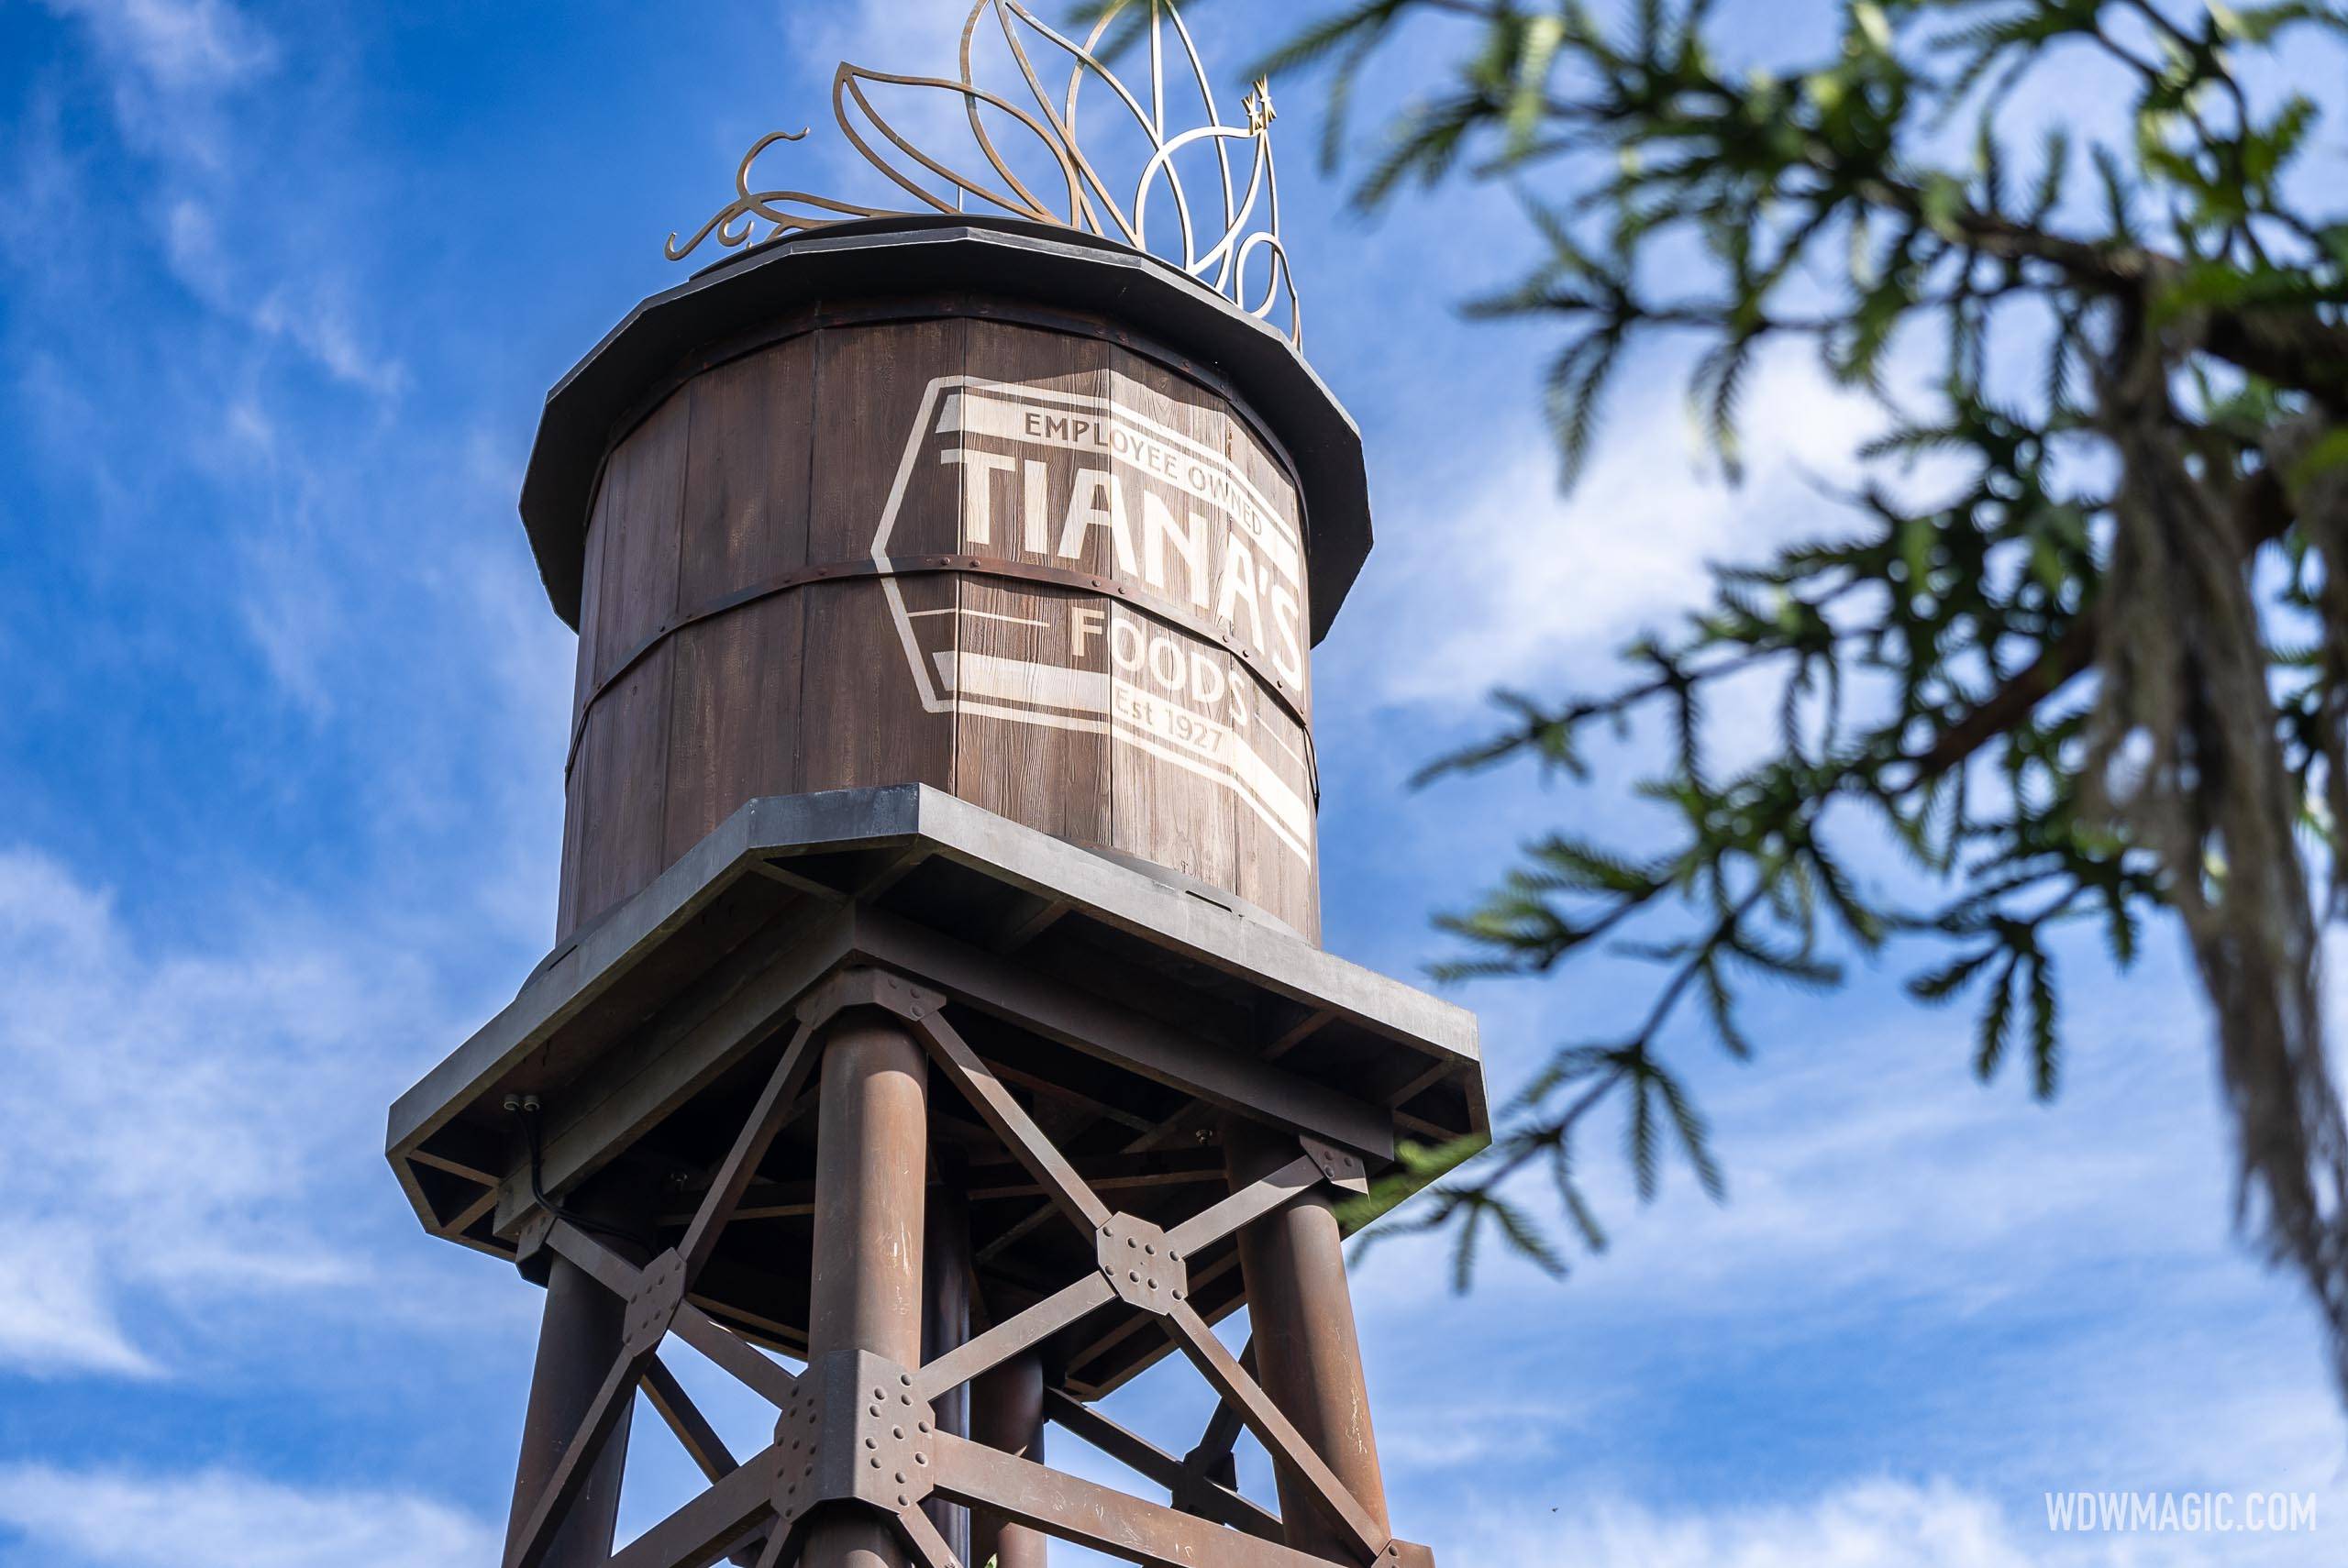 Tiana's Water Tower viewed from the ride path